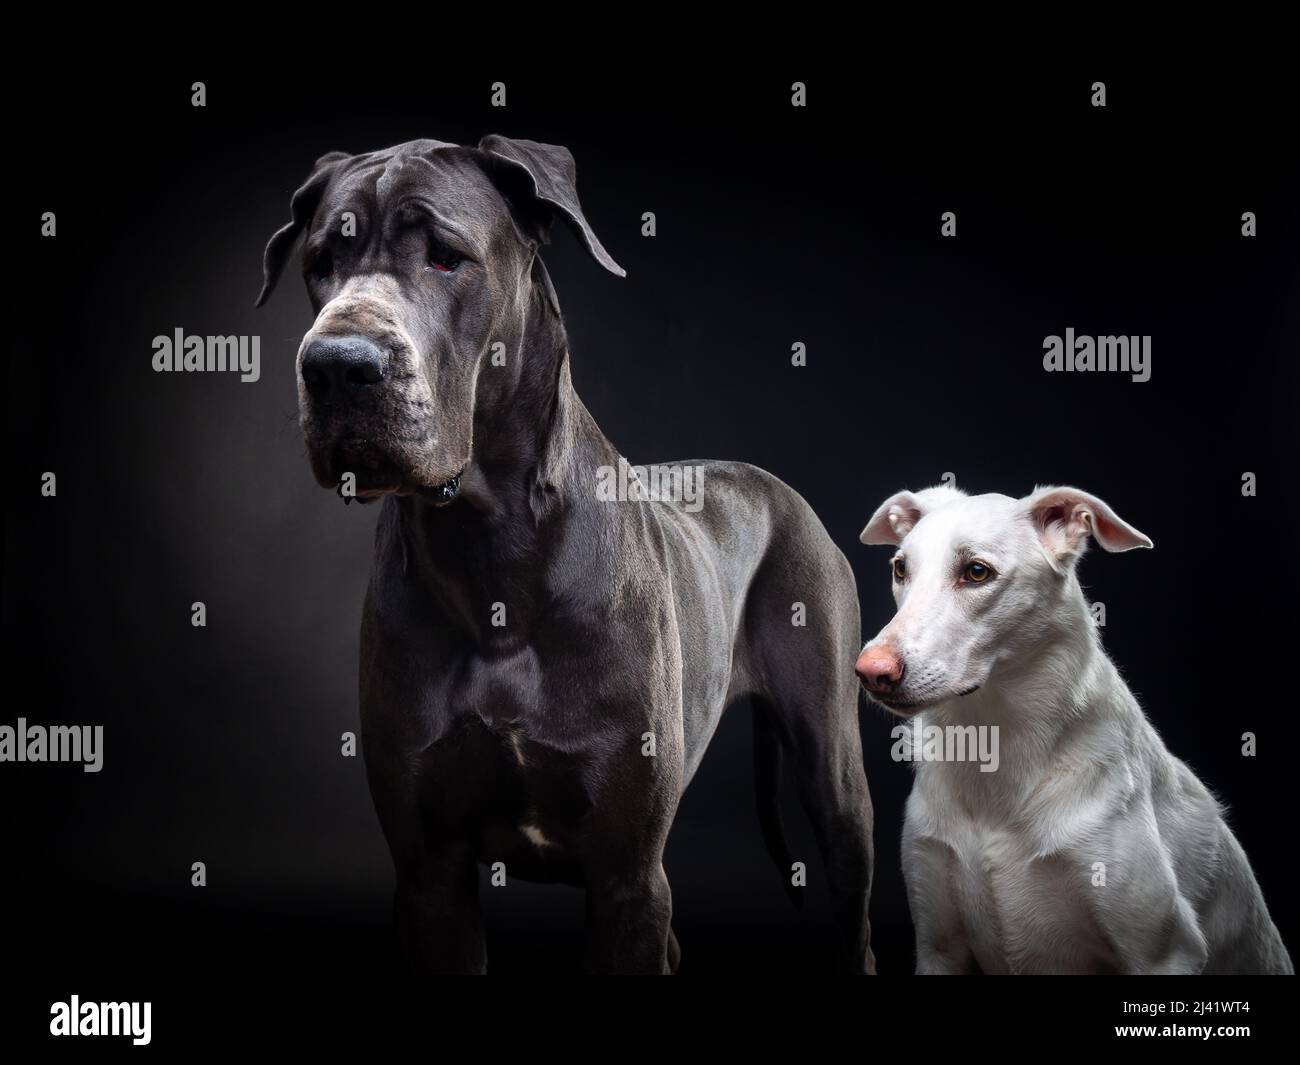 Portrait of a Great Dane and a white dog on an isolated black background. Shot in the studio in a dark key. Stock Photo